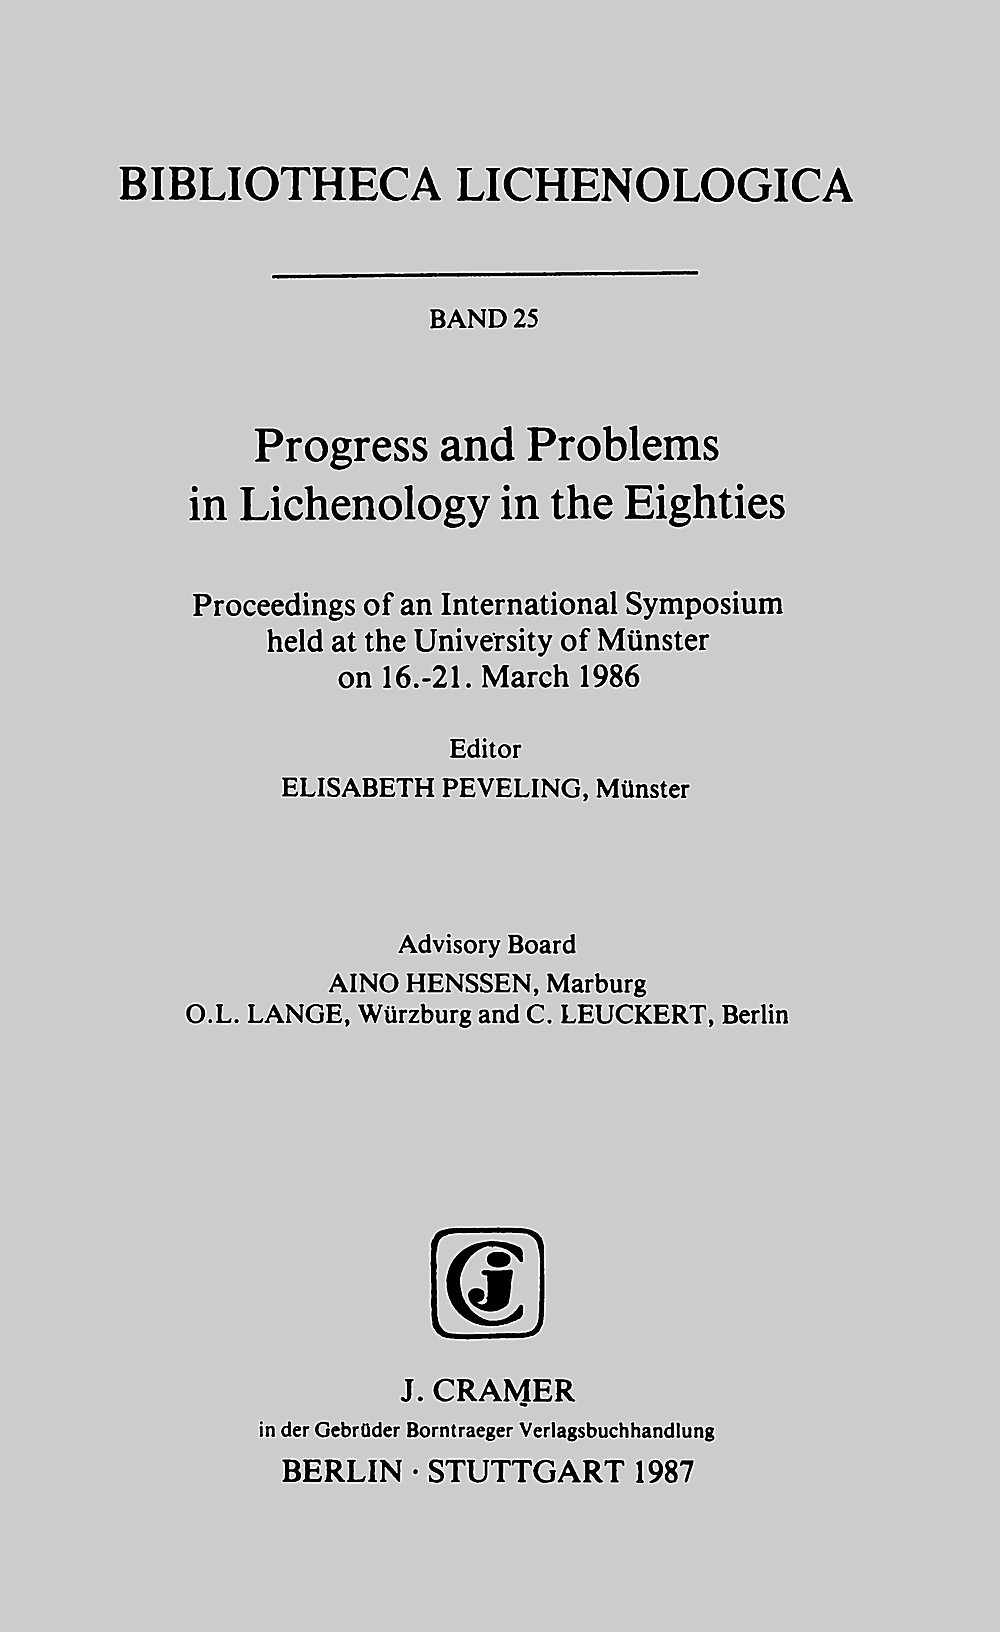 Progress and Problems in Lichenology in the Eighties: Proceedings of an International Symposium held at the University of Münster on 16.-21. March 1986 (BIBLIOTHECA LICHENOLOGICA) - Peveling, Elisabeth